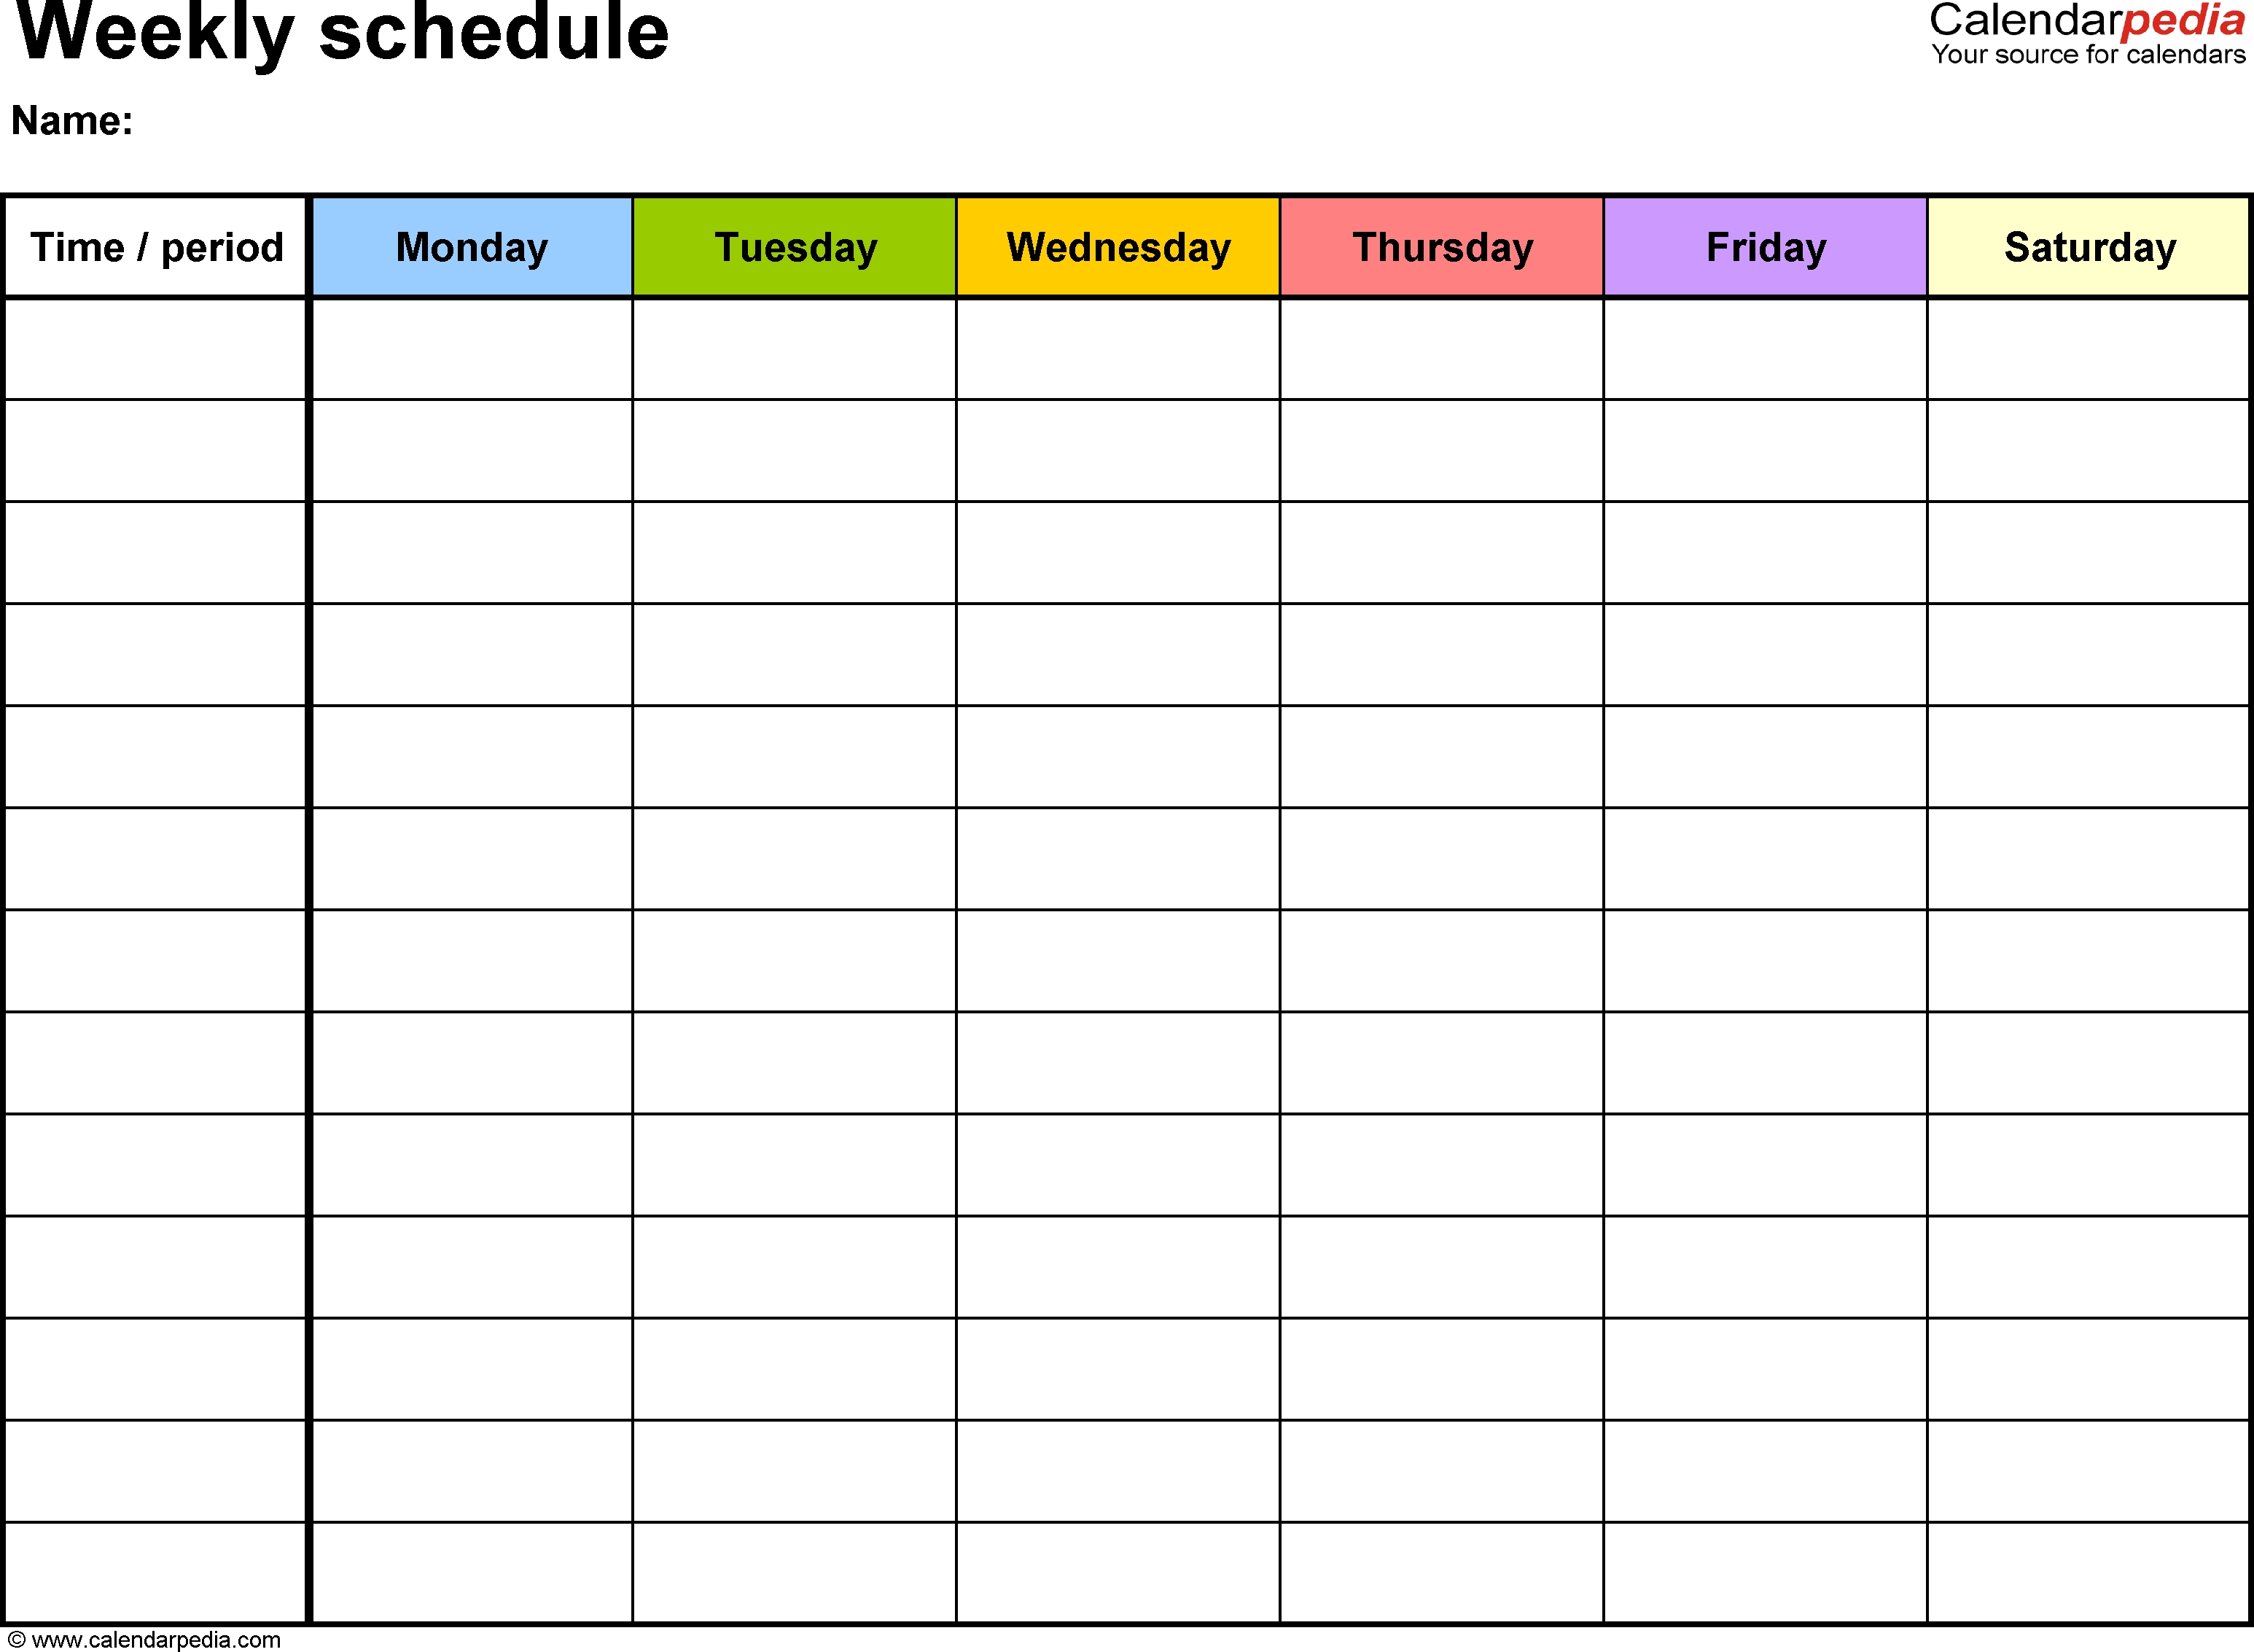 Free Weekly Schedule Templates For Word - 18 Templates-5 Day Weekly Planner Template